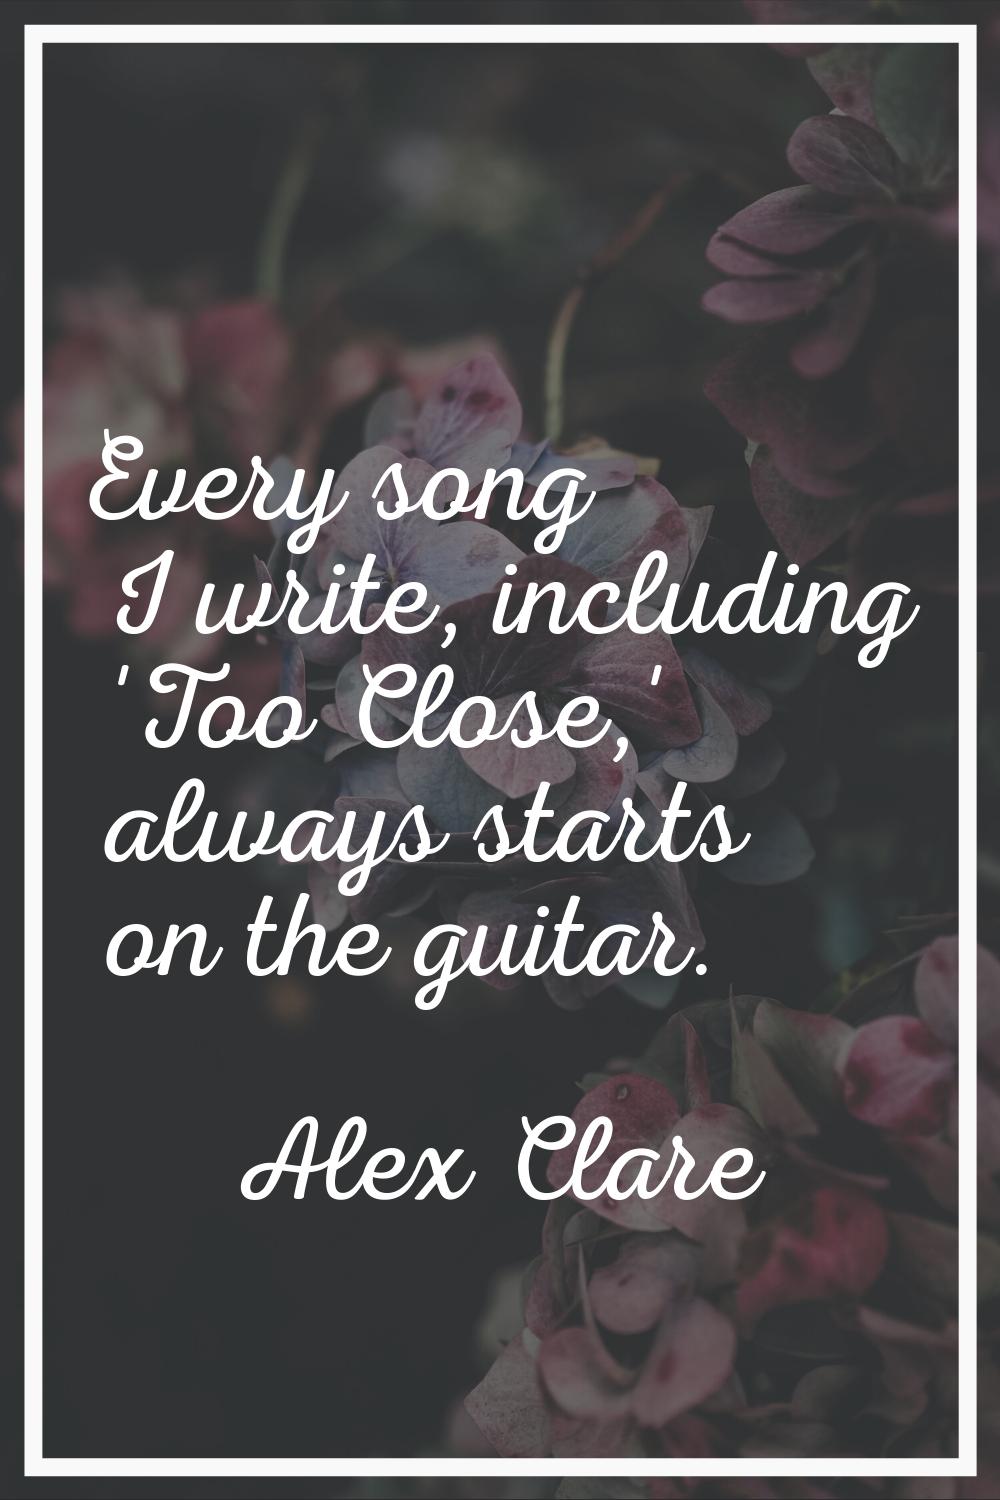 Every song I write, including 'Too Close,' always starts on the guitar.